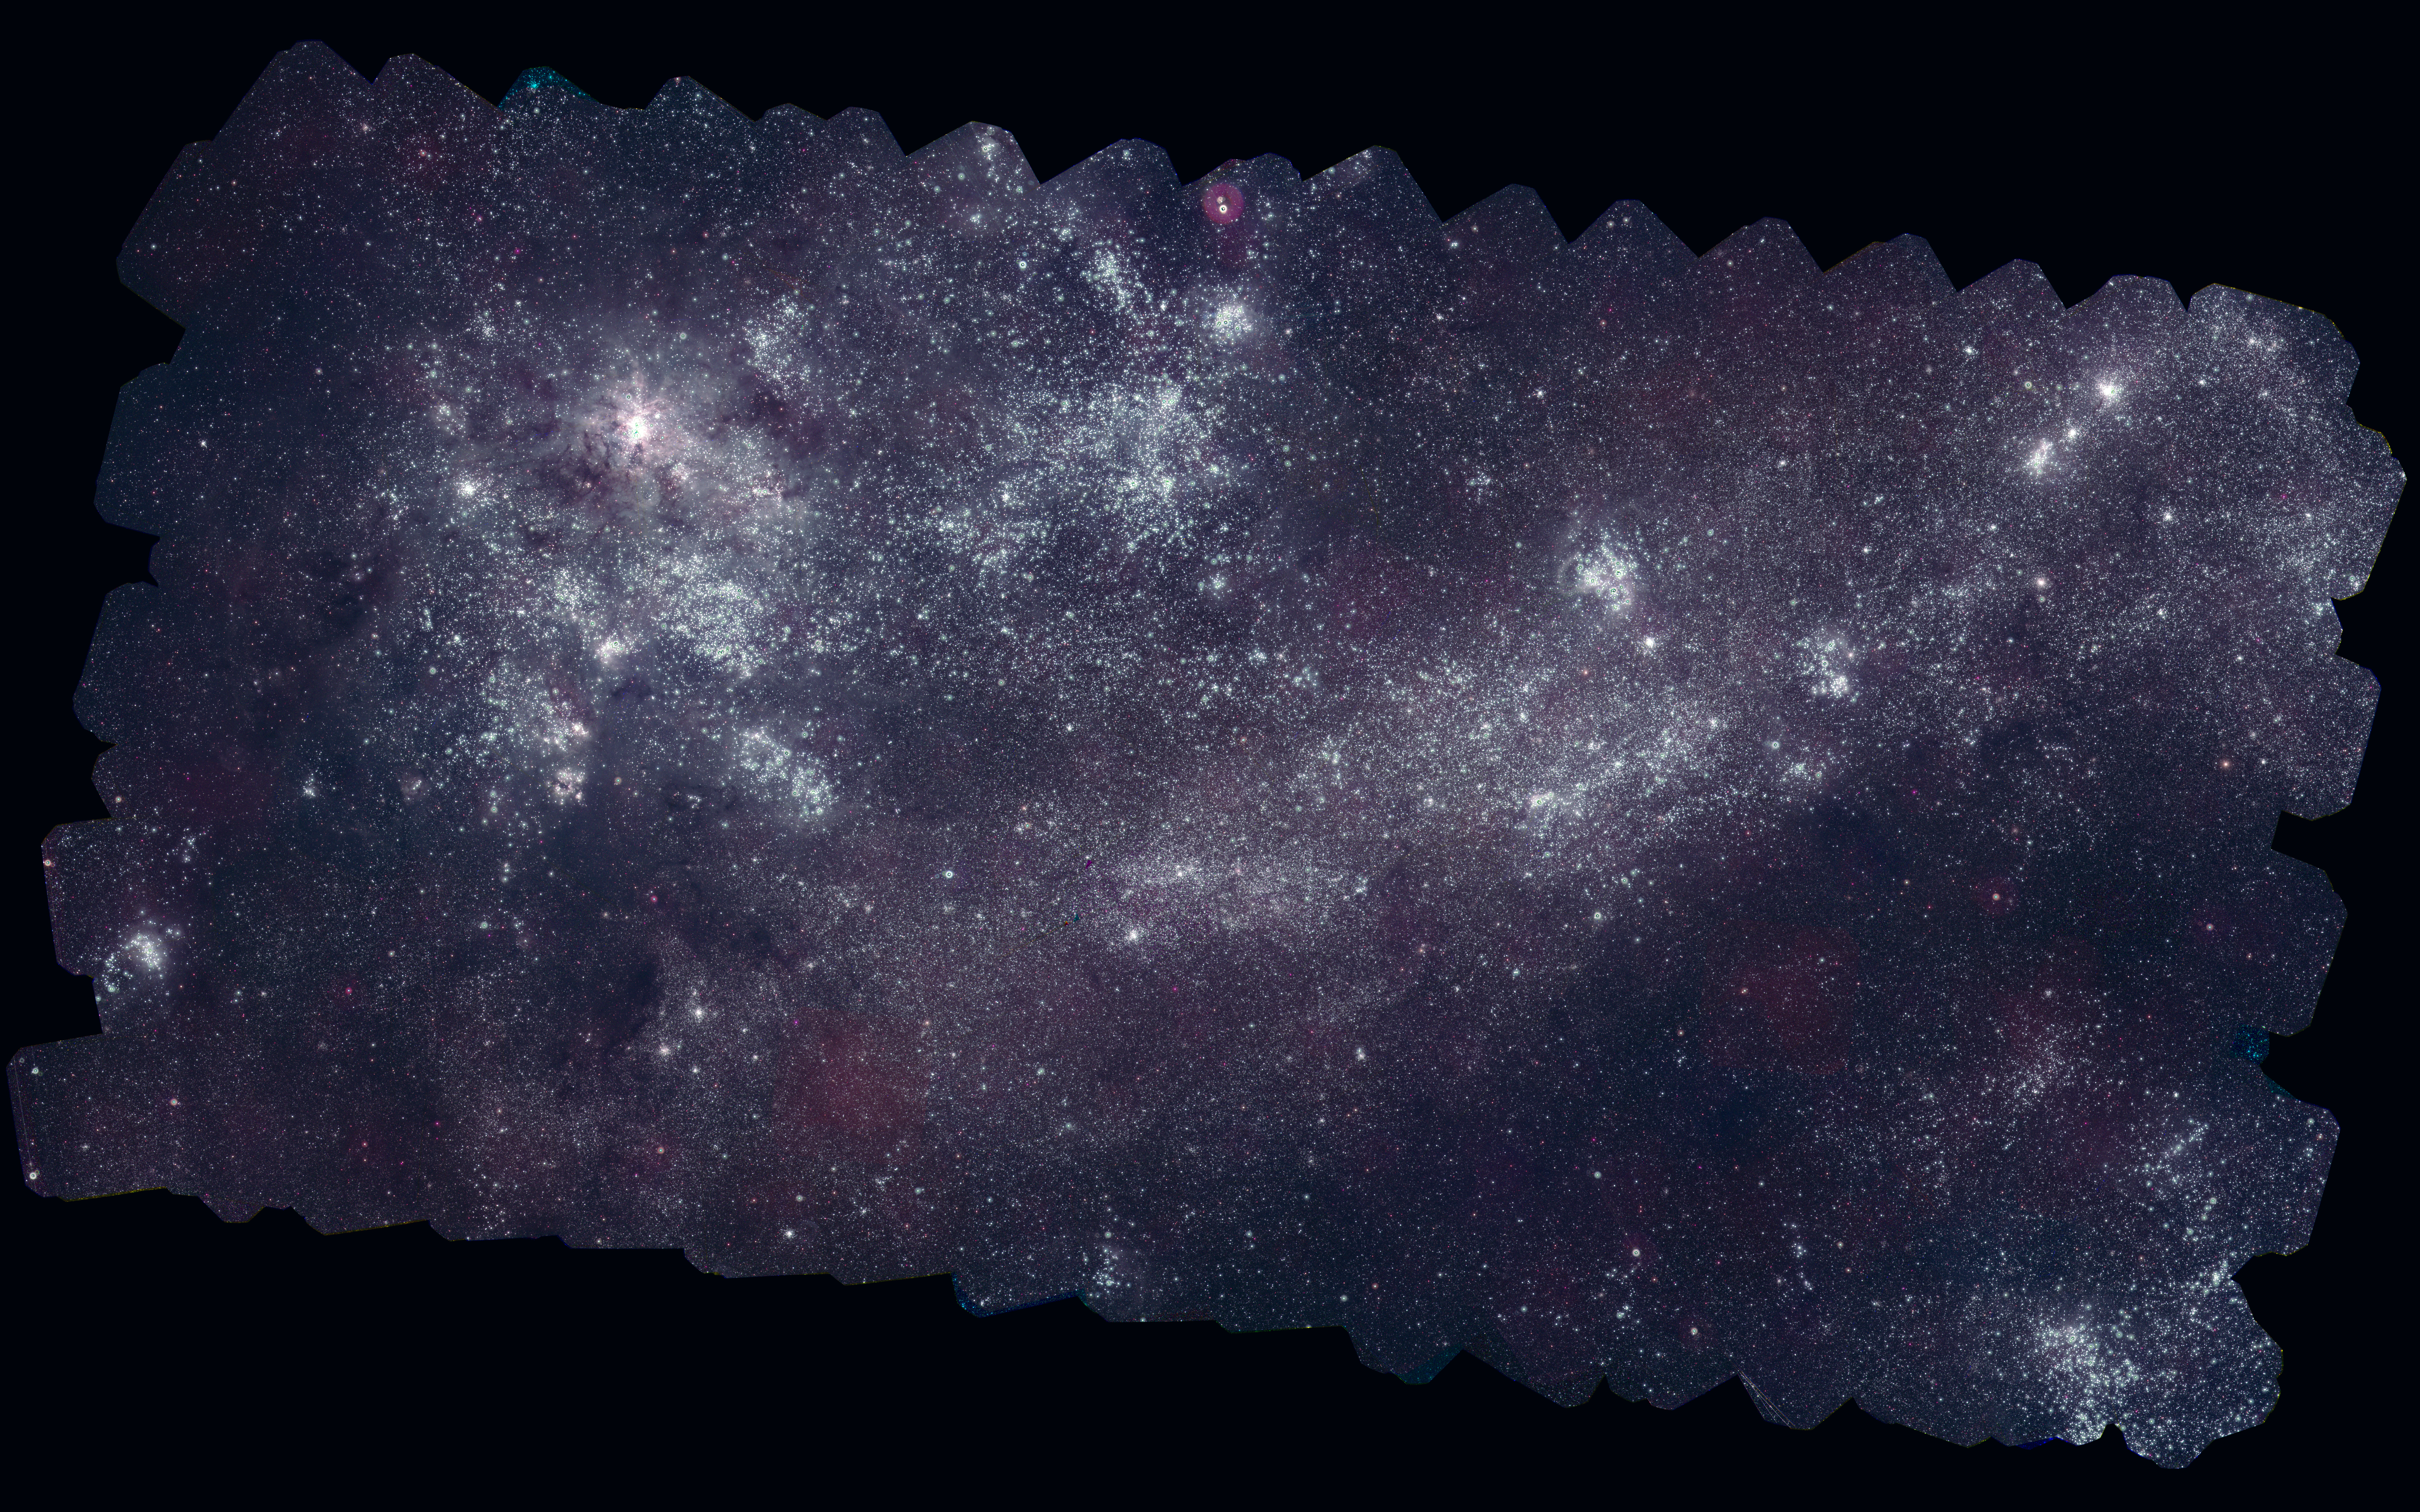 This is the Swift LMC mosaic at full resolution. Nearly a million ultraviolet sources appear in this mosaic of the Large Magellanic Cloud, which was assembled from 2,200 images taken by the Ultraviolet/Optical Telescope aboard NASA's Swift satellite. The 160-megapixel image required a cumulative exposure of 5.4 days. The image includes light from 1,600 to 3,300 angstroms — UV wavelengths largely blocked by Earth's atmosphere — and has an angular resolution of 2.5 arcseconds. Viewing in the ultraviolet allows astronomers to suppress the light of normal stars like the sun, which are not very bright at these higher energies, and provides a clearer picture of the hottest stars and star-formation regions. The LMC is about 14,000 light-years across. The image is oriented with north at top.Credit: NASA/Swift/S. Immler (Goddard) and M. Siegel (Penn State)